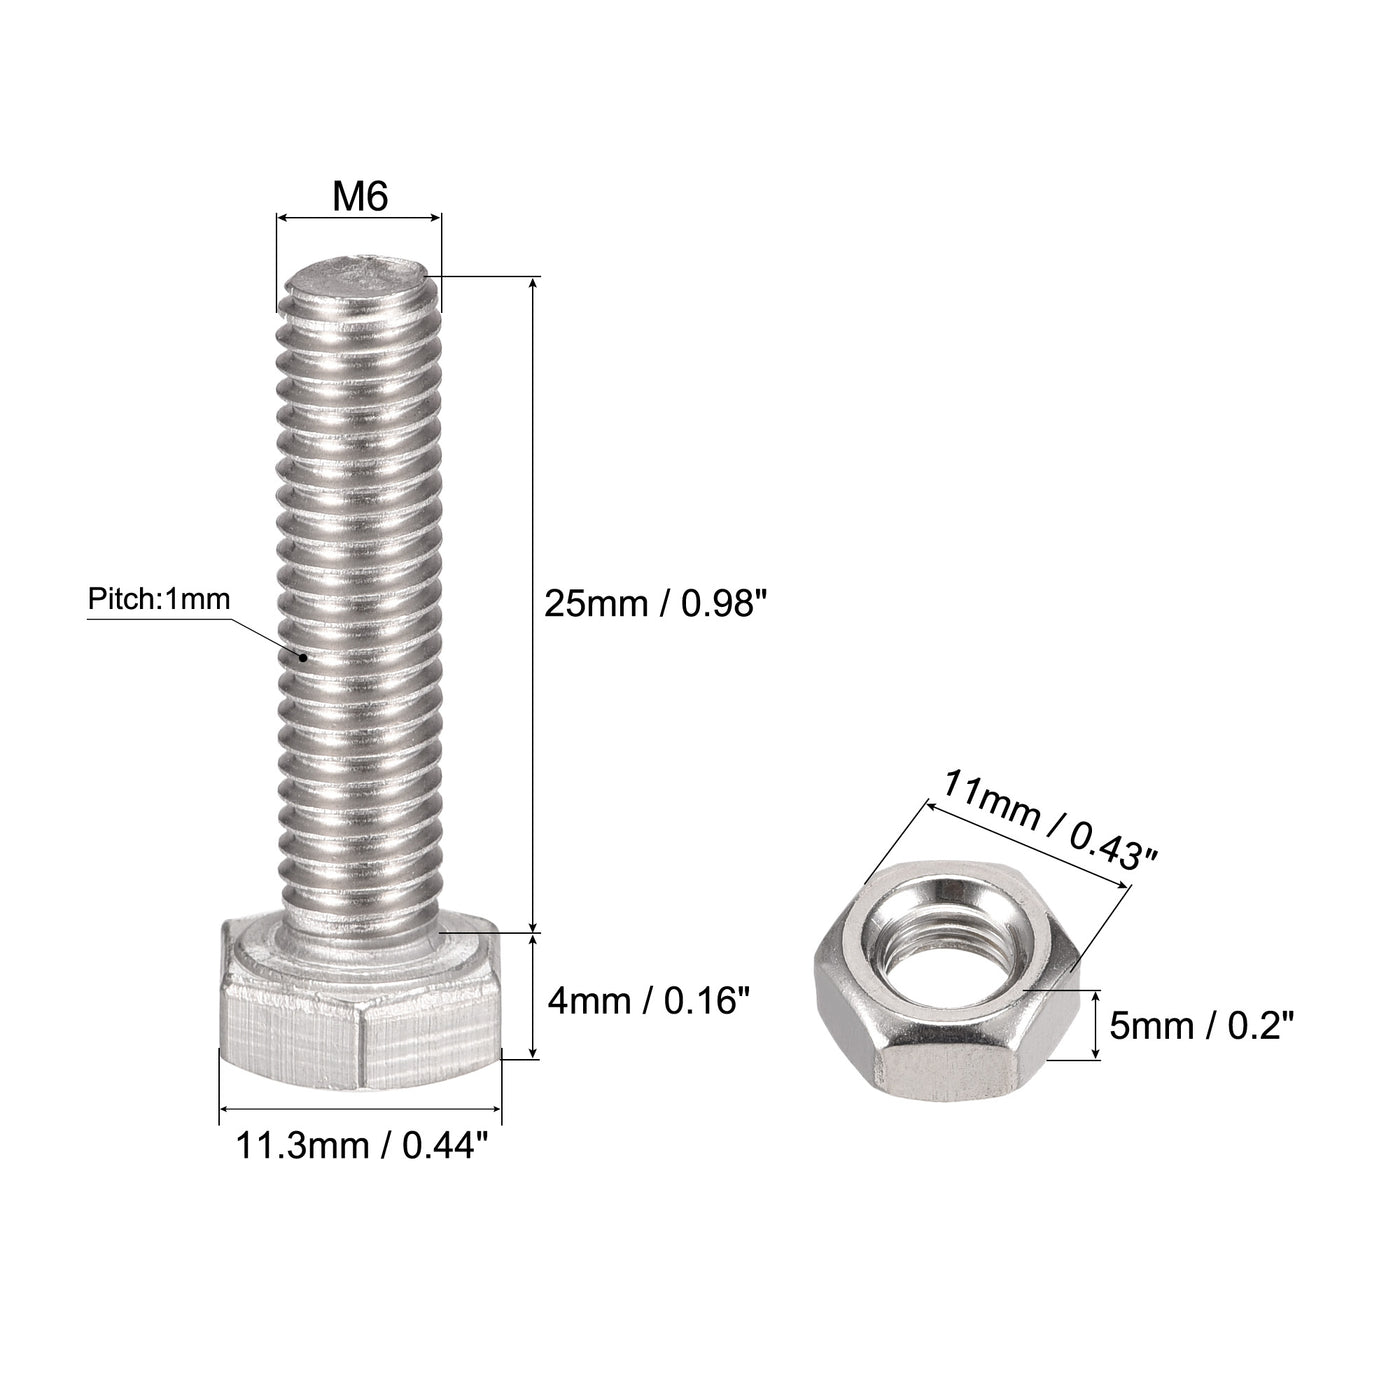 Uxcell Uxcell M6 x 20mm Hex Head Screws Bolts, Nuts, Flat & Lock Washers Kits, 304 Stainless Steel Fully Thread Hexagon Bolts 10 Sets